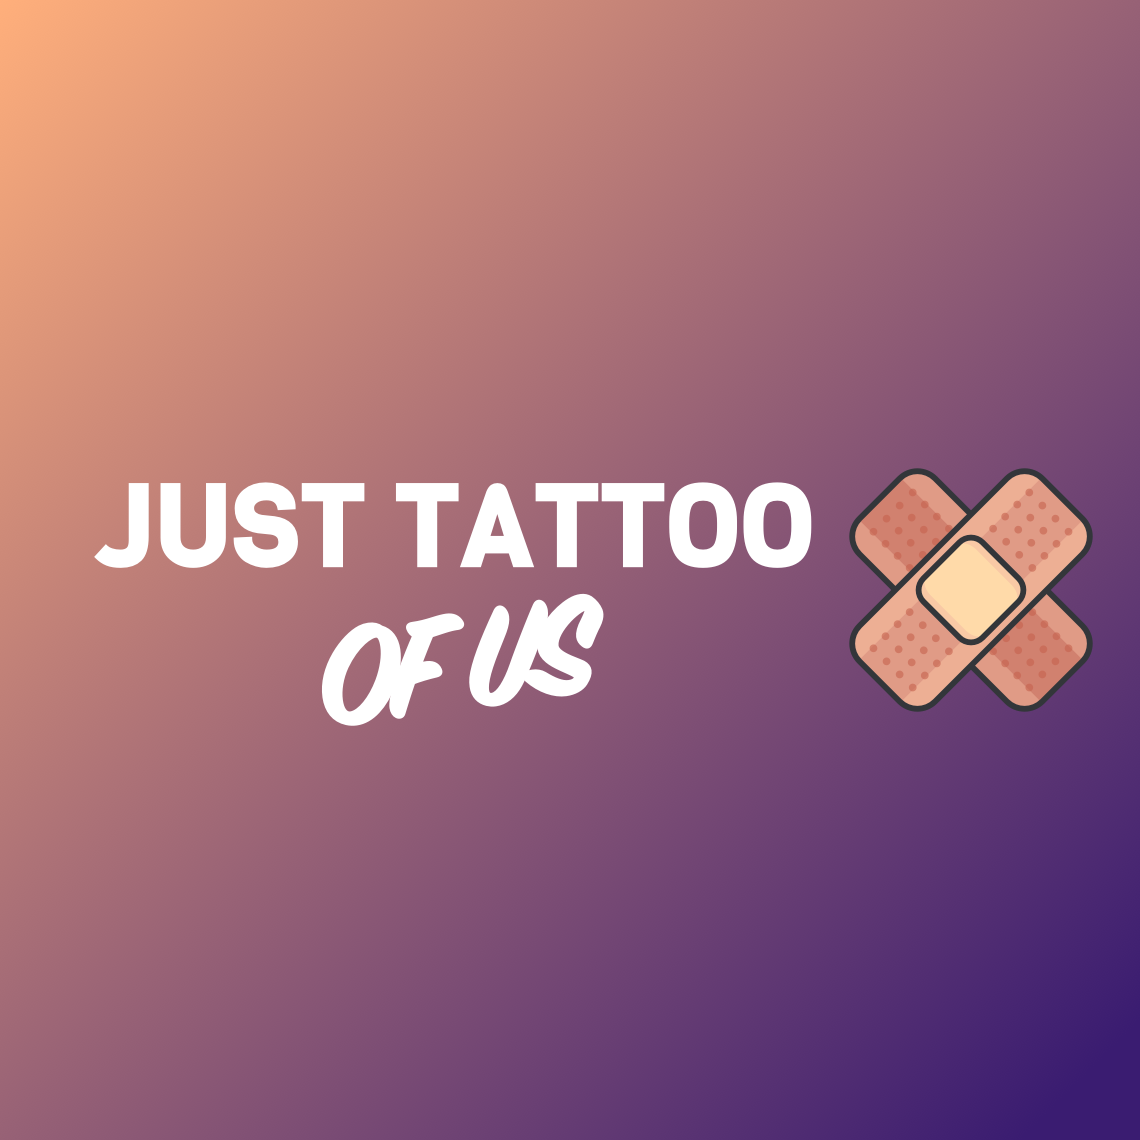 How to WATCH full Just Tattoo Of Us episodes for free!